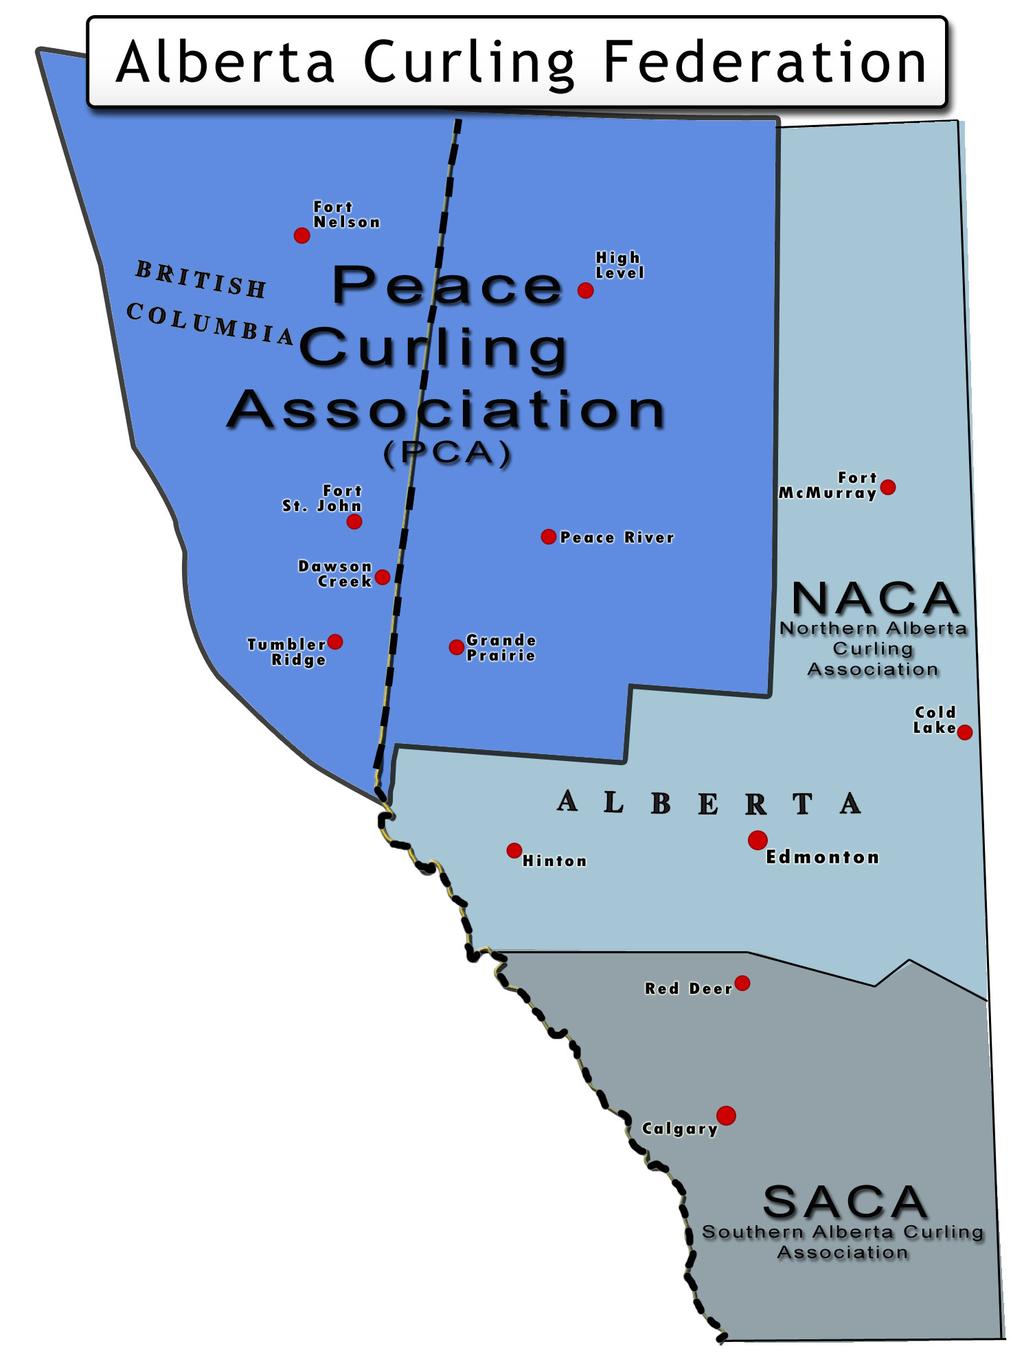 Peace Curling Tour Market Profile The Peace Curling Association (PCA) is the largest of the 3 regional curling associations that make up the Alberta Curling Federation.